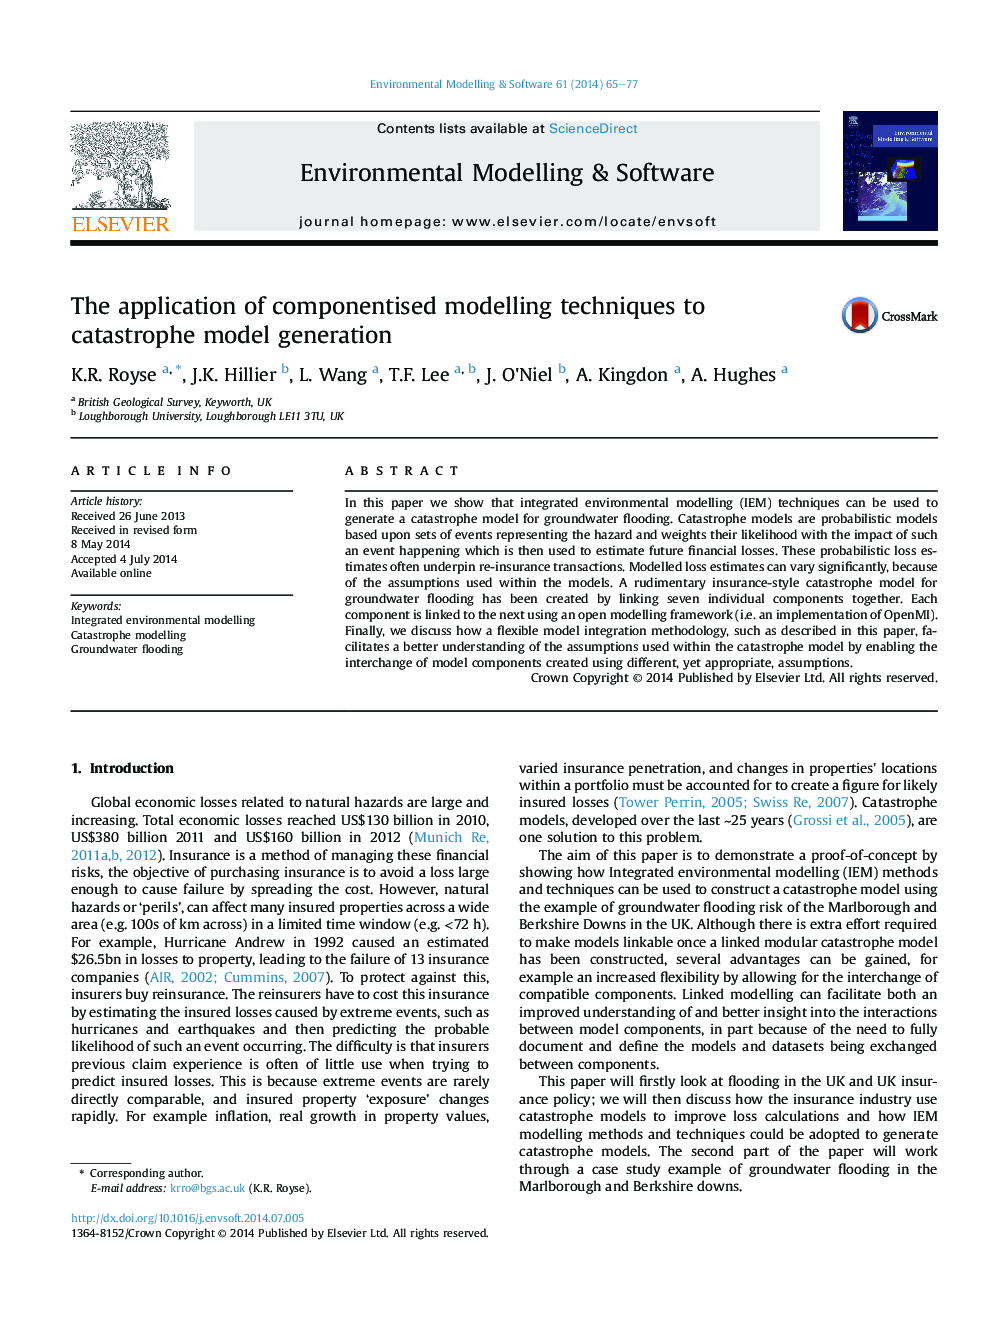 The application of componentised modelling techniques to catastrophe model generation